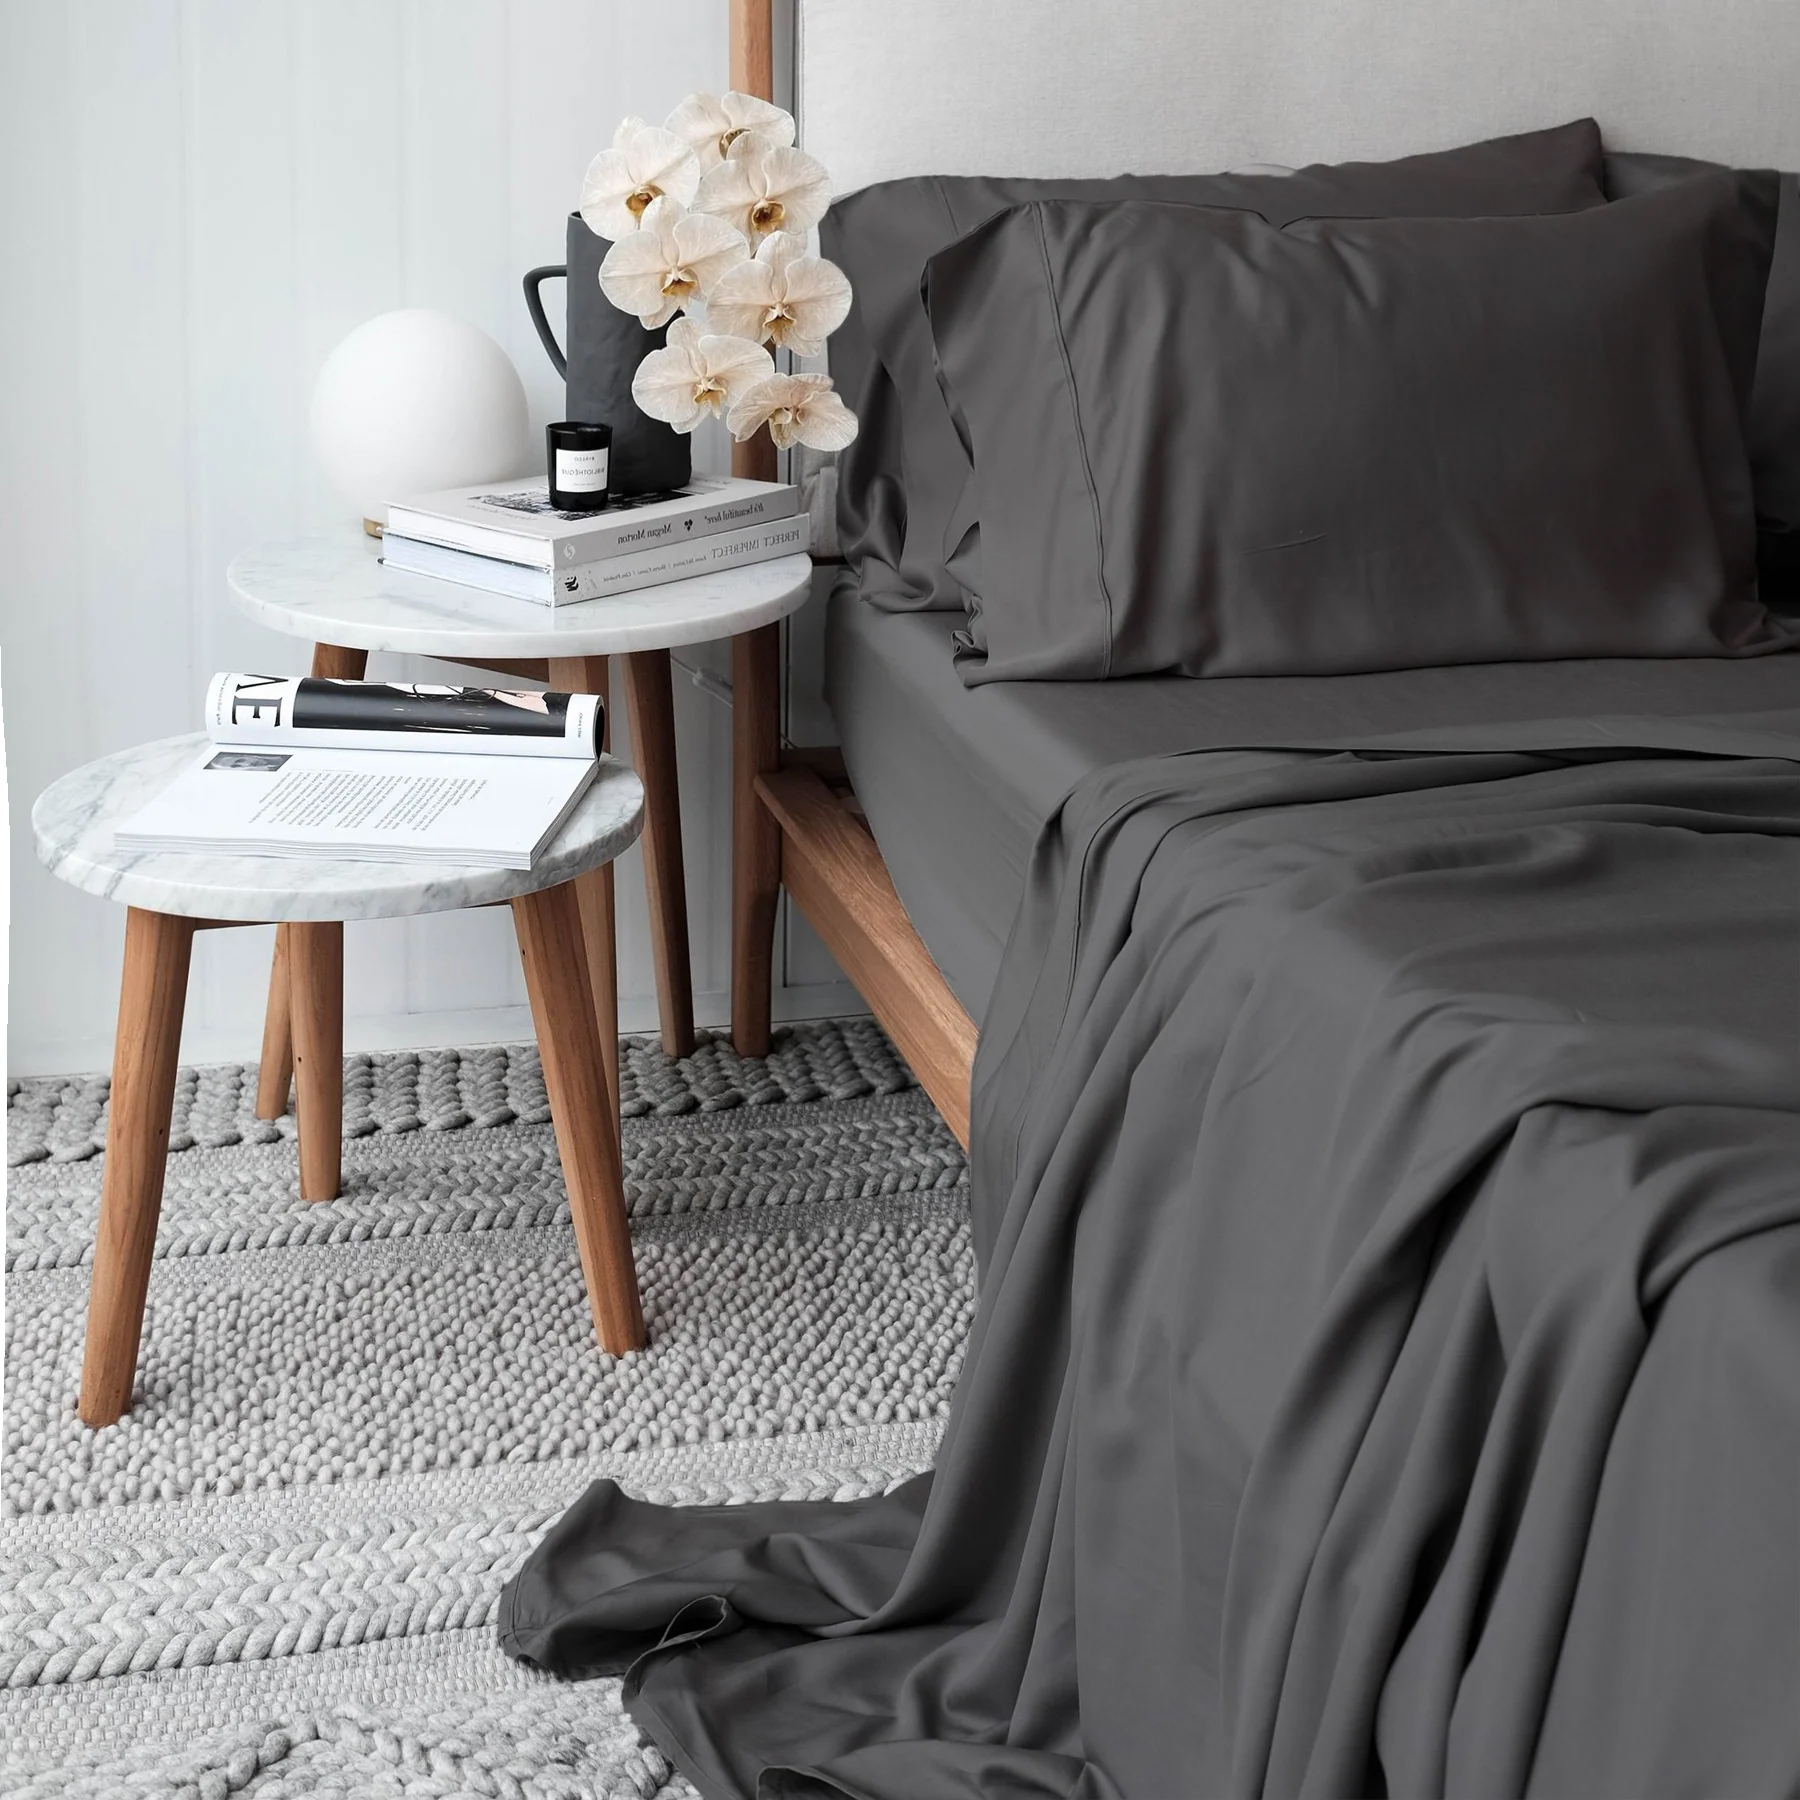 A bed made up in dark gray Tencel sheets. 